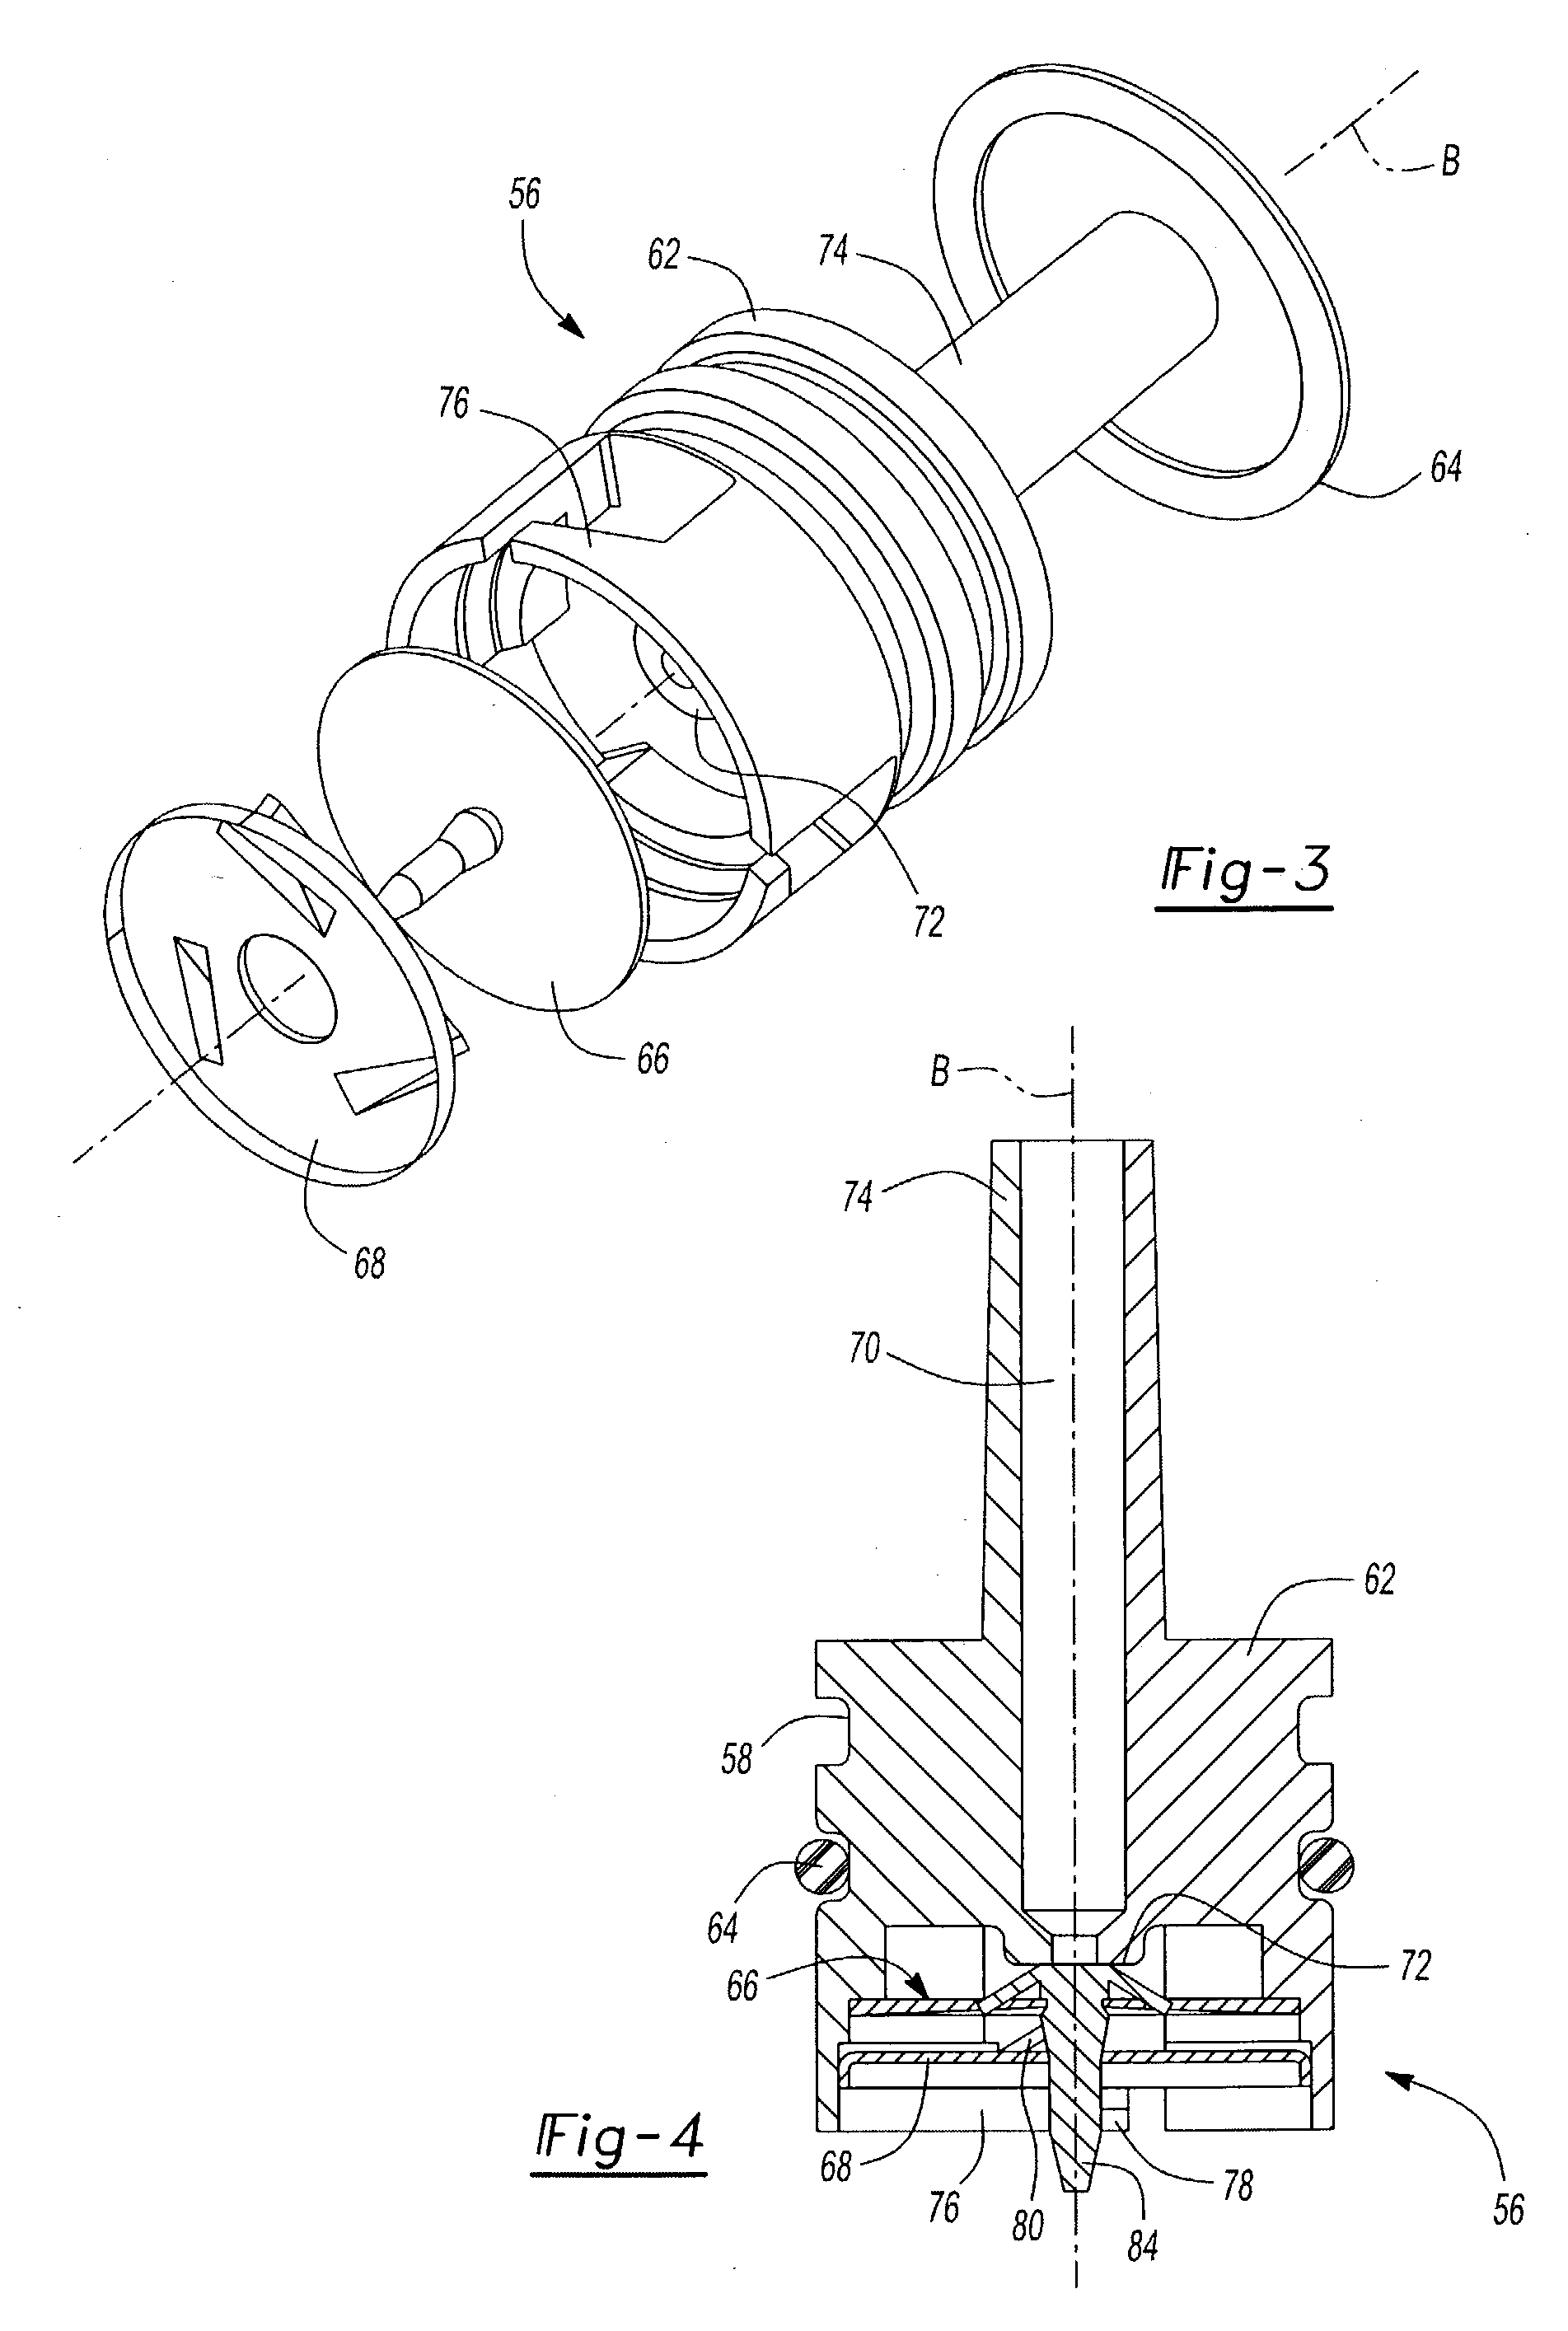 Temperature responsive valve assembly for a pneumatic spring